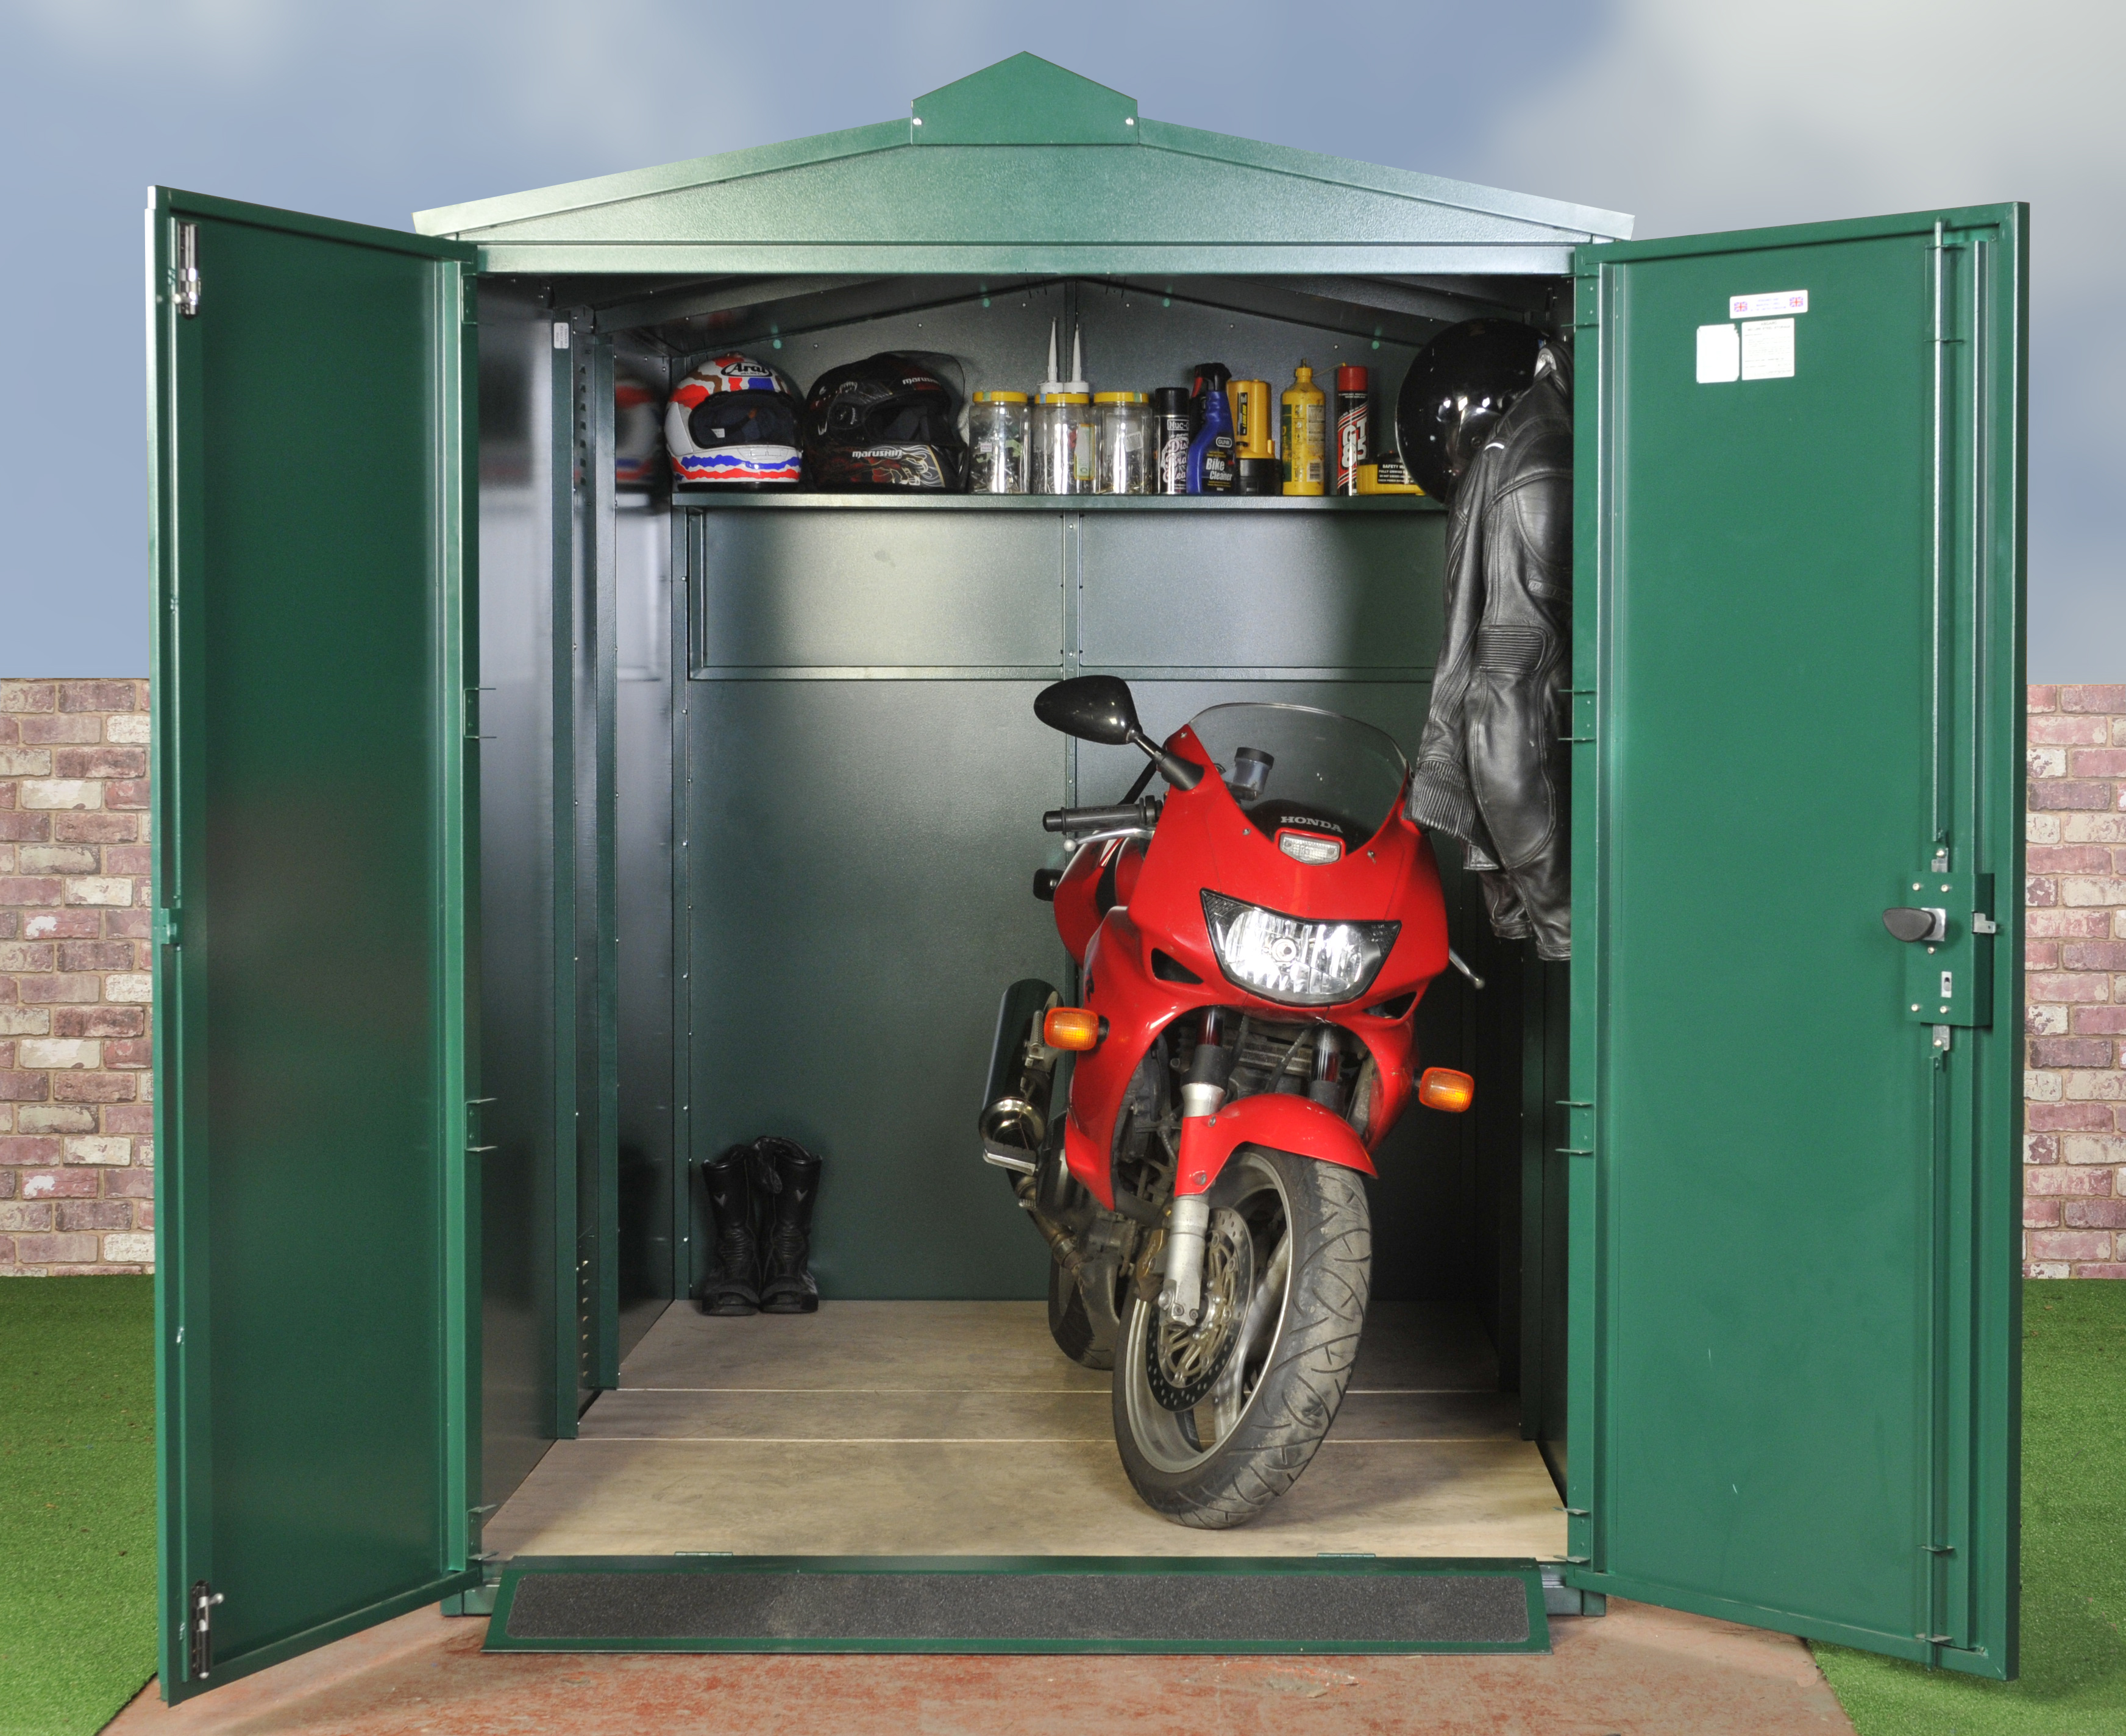 shed project: Instant Get How to build a motorcycle ...